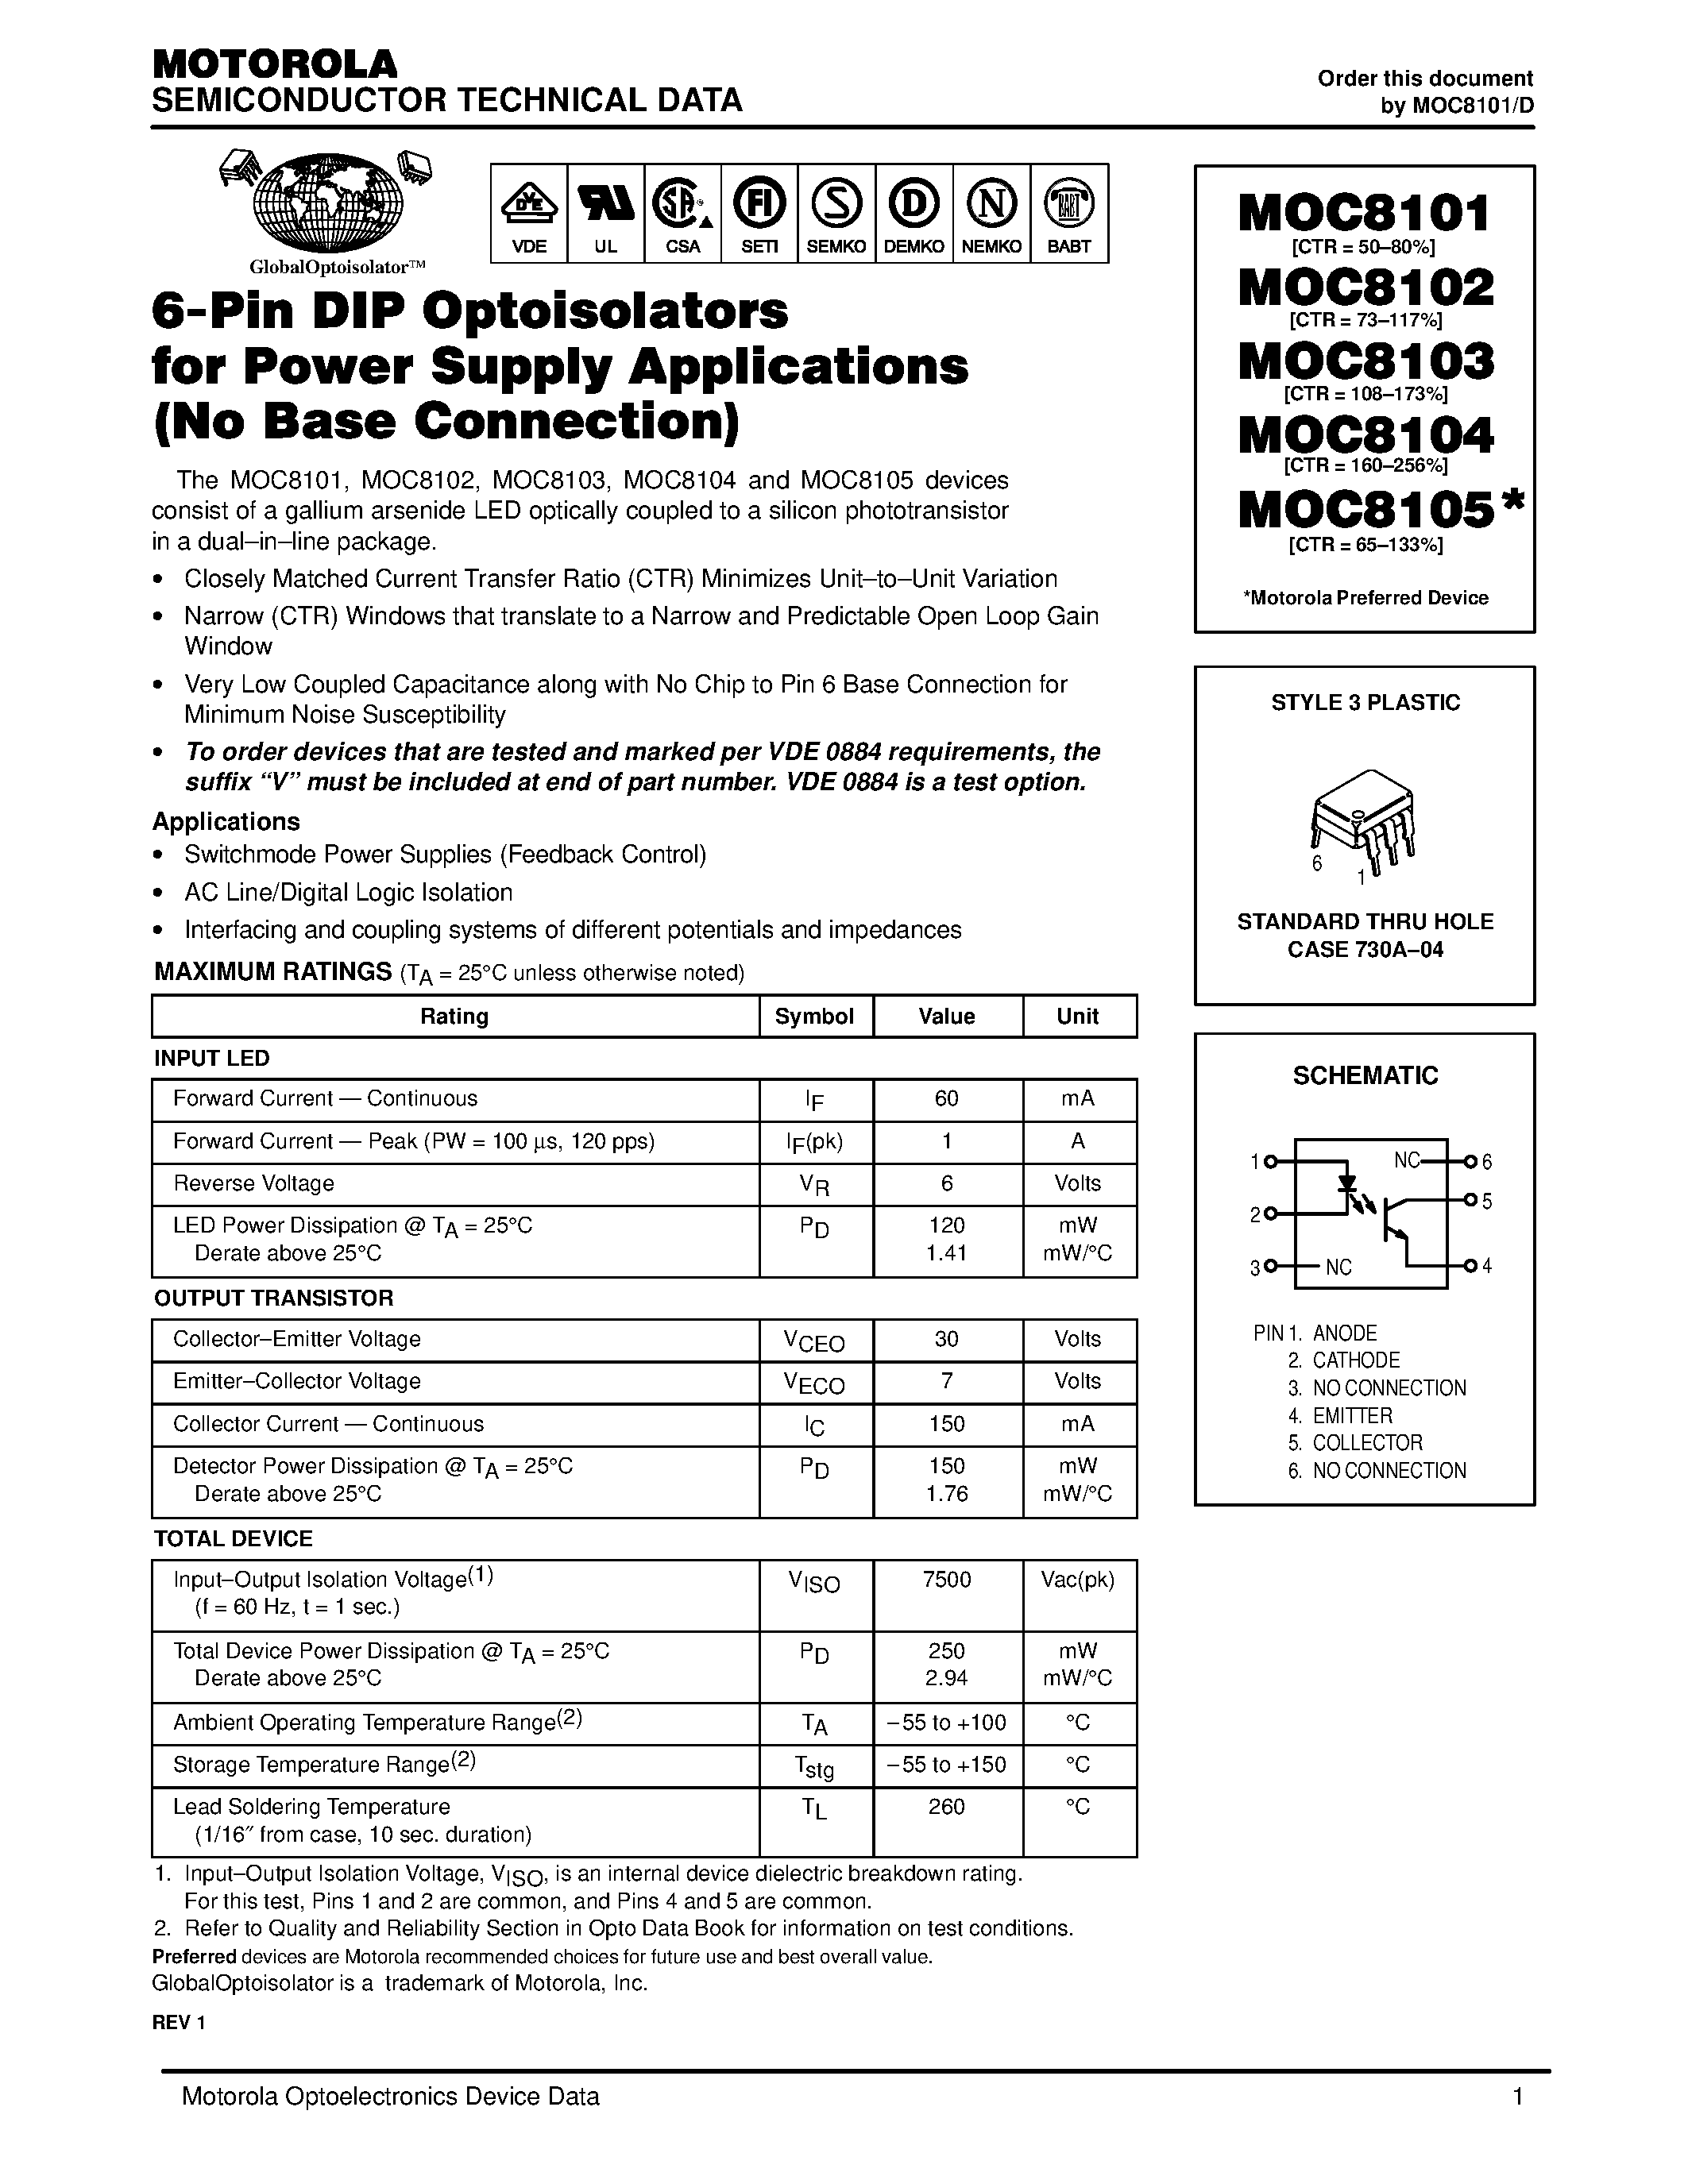 Datasheet MOC8101 - (MOC8101 / MOC8102 / MOC8103 / MOC8104 / MOC8105) 6-Pin DIP Optoisolators for Power Supply Applications page 1